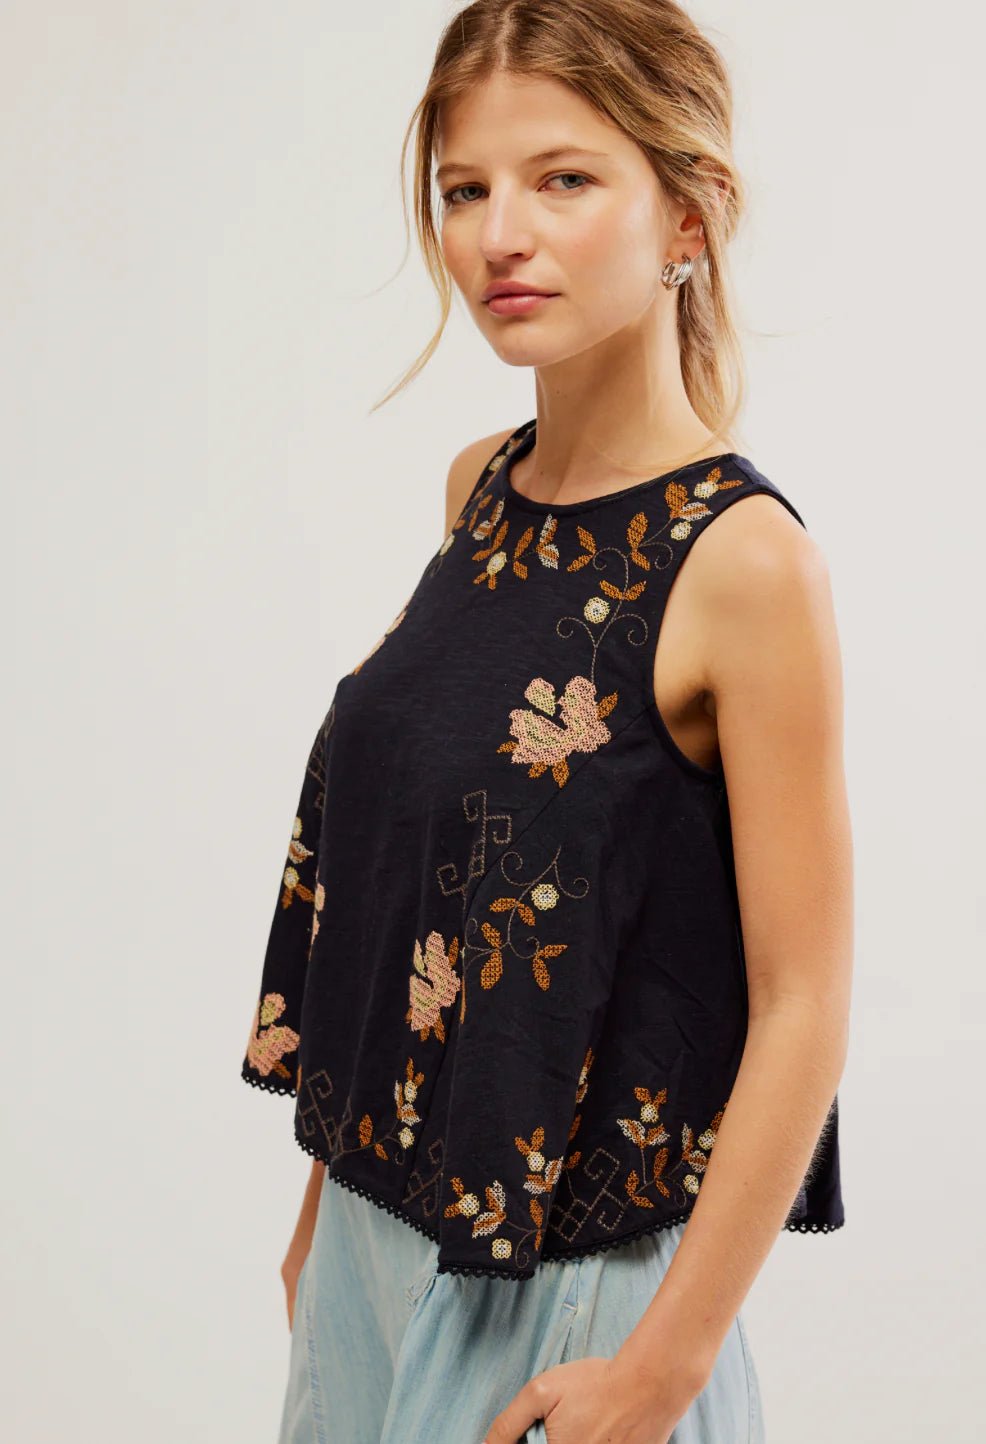 Free People Fun And Flirty Embroidered TopTop